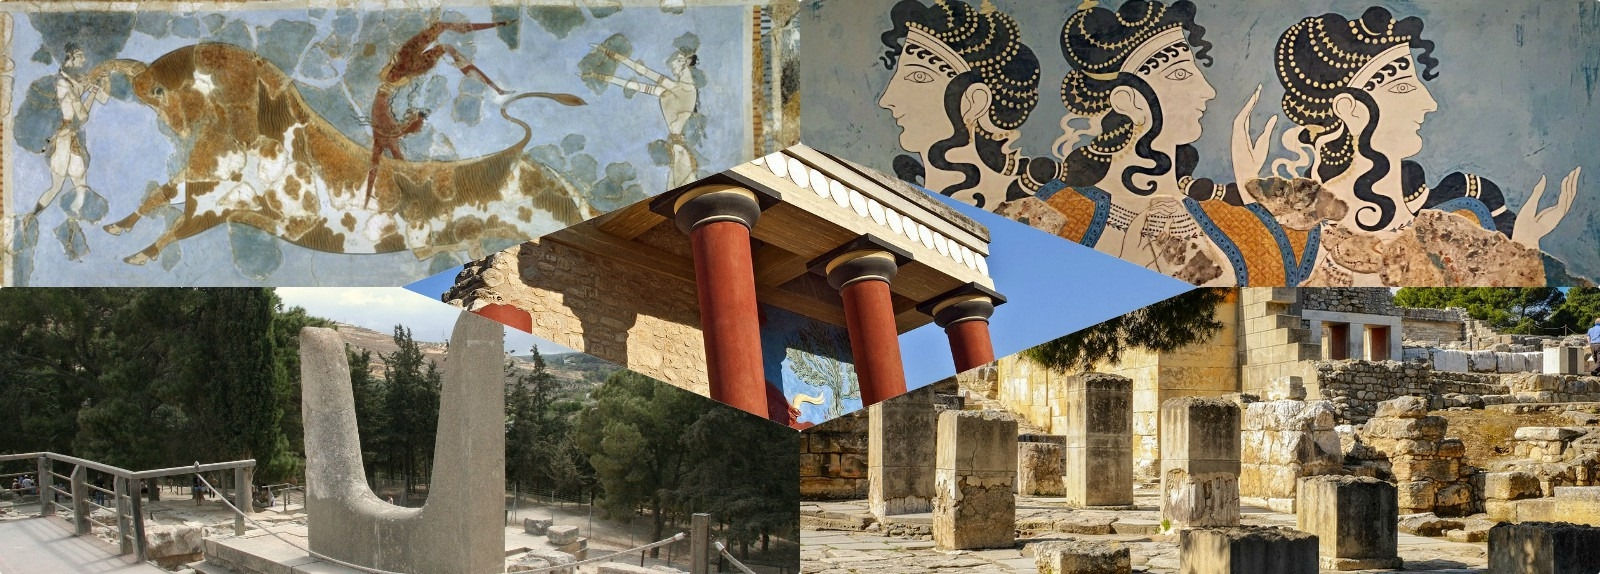 Ancient Palace of Knossos